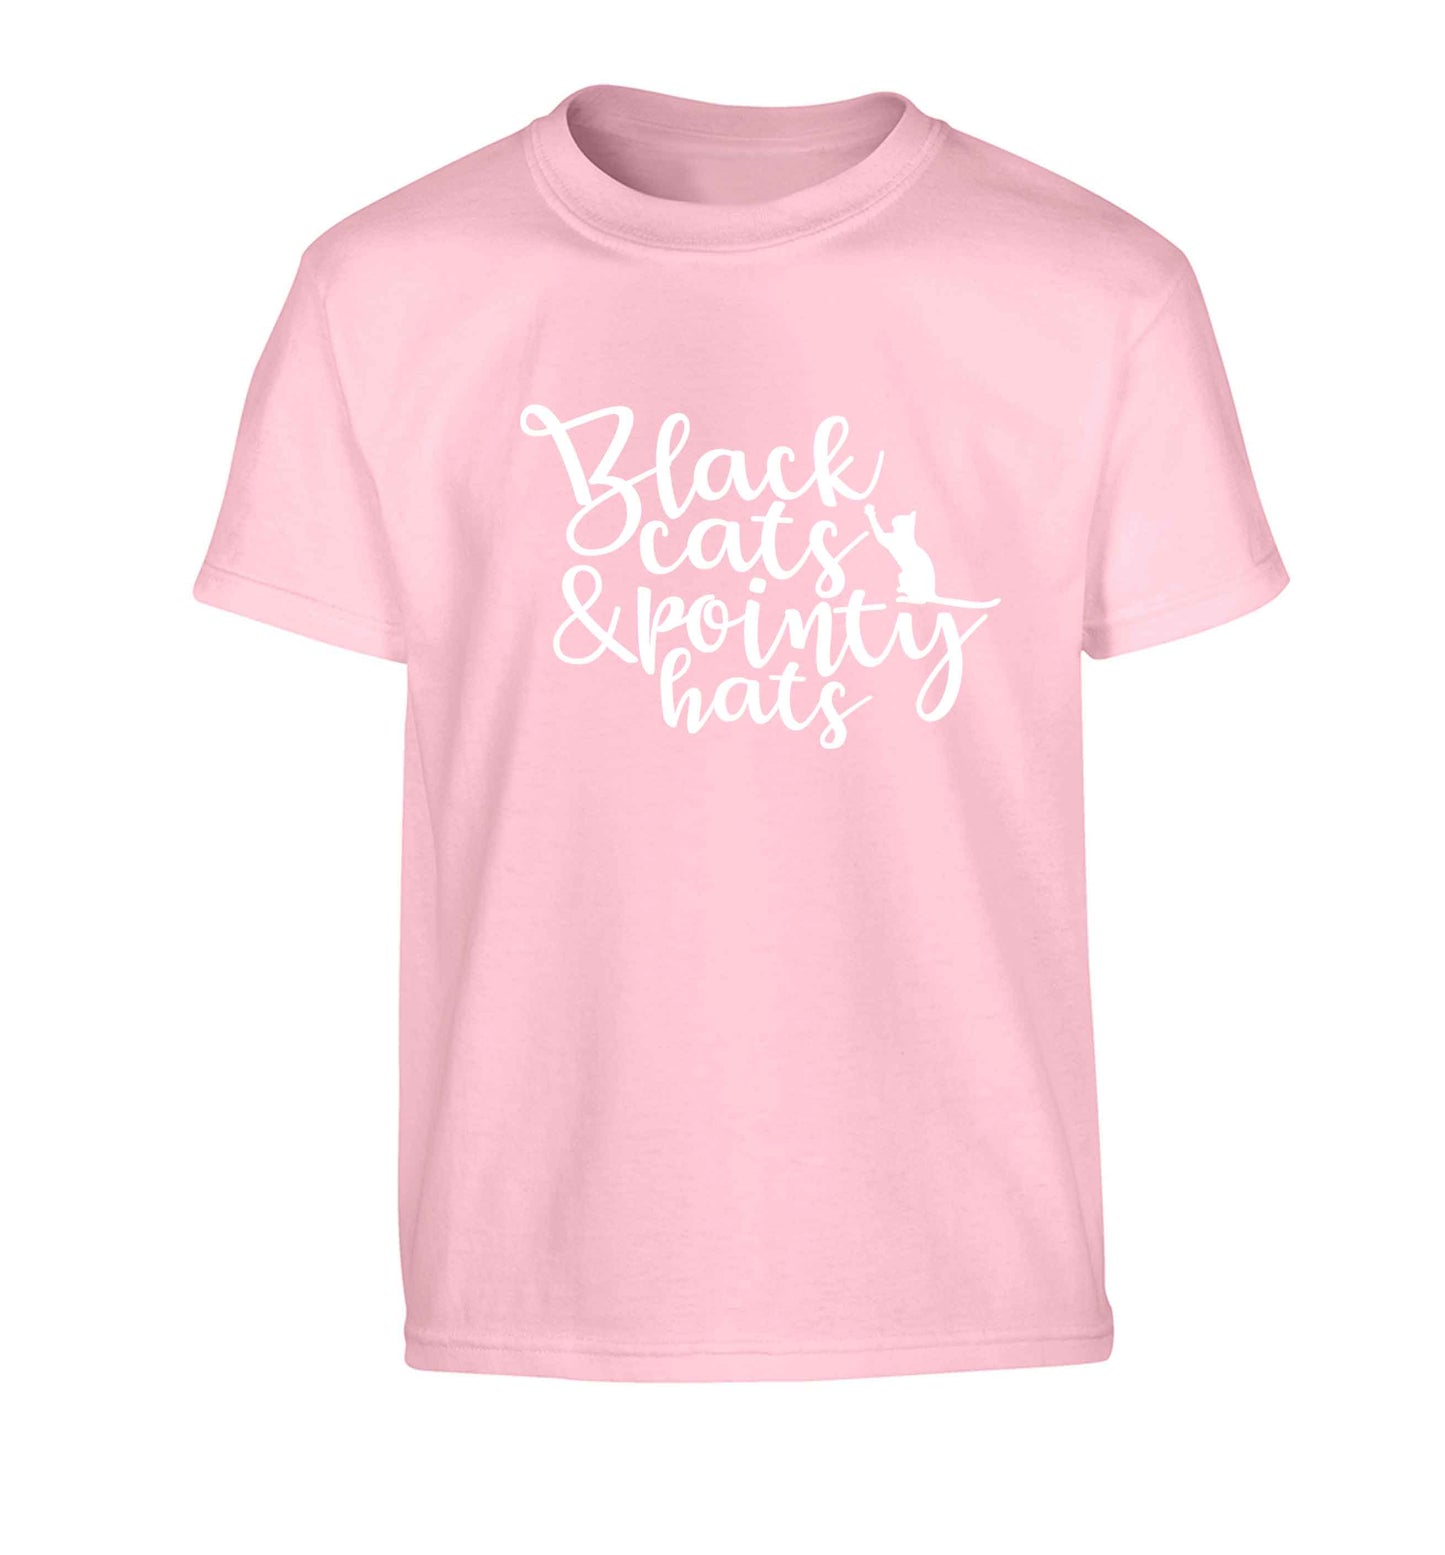 Black cats and pointy hats Children's light pink Tshirt 12-13 Years